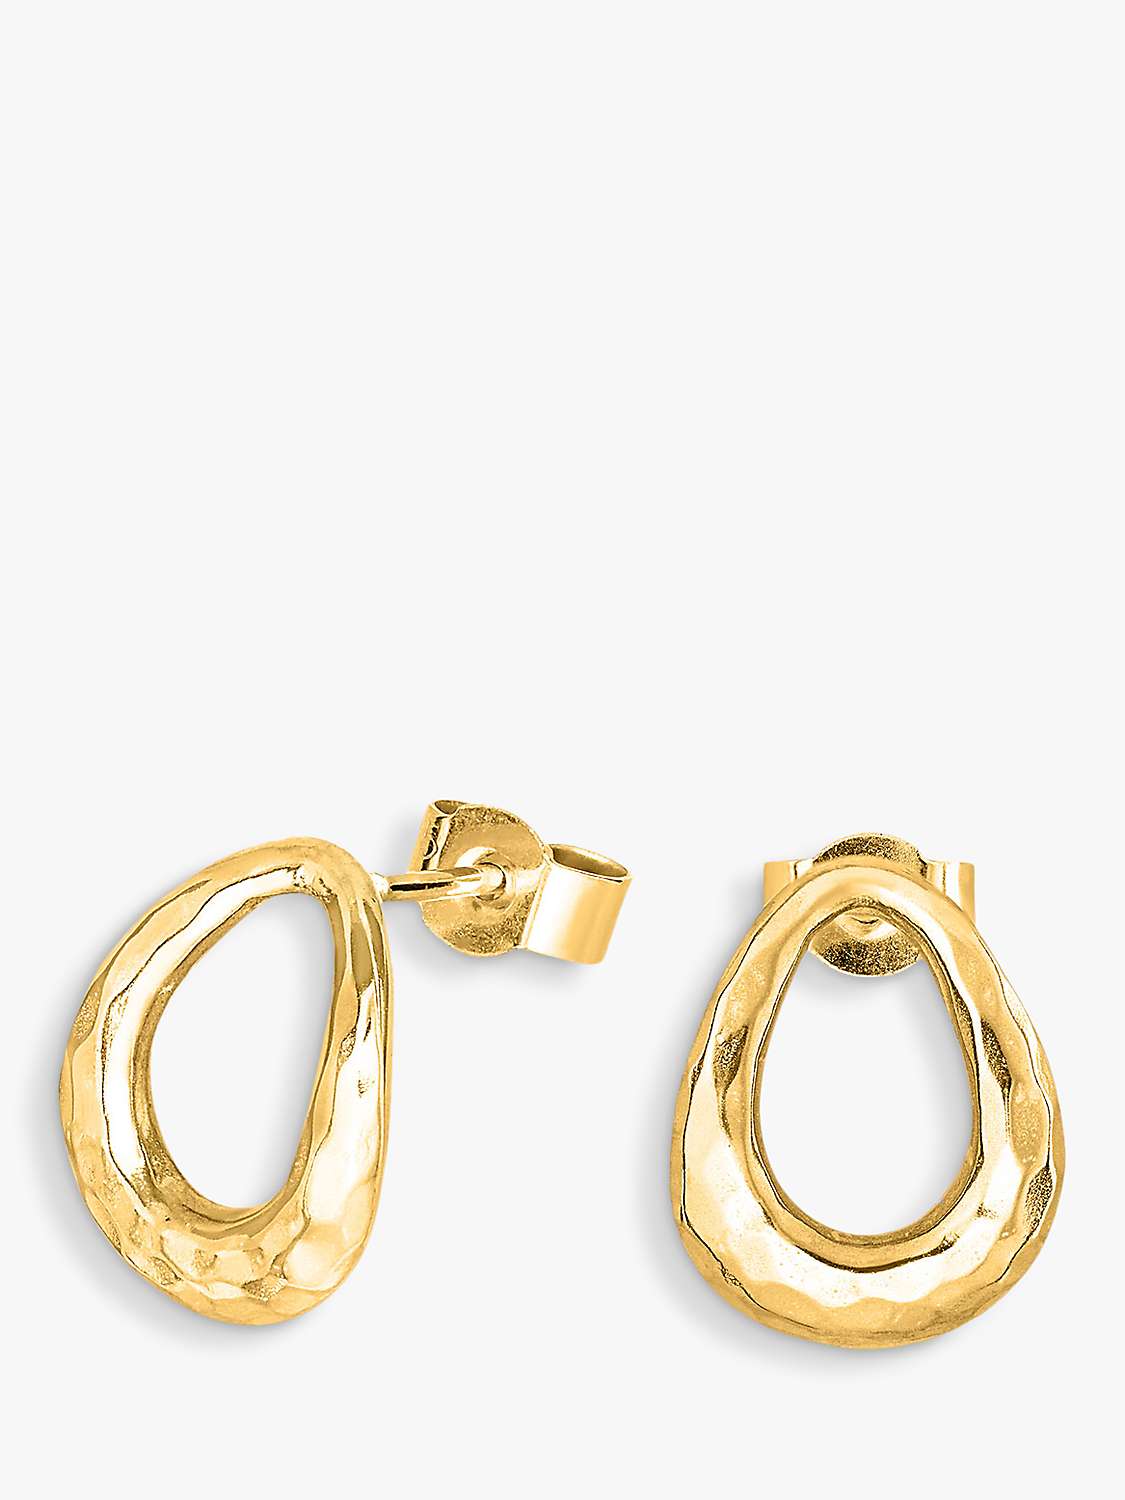 Buy Dower & Hall Yellow Gold Vermeil Large Entwined Oval Stud Earrings, Gold Online at johnlewis.com